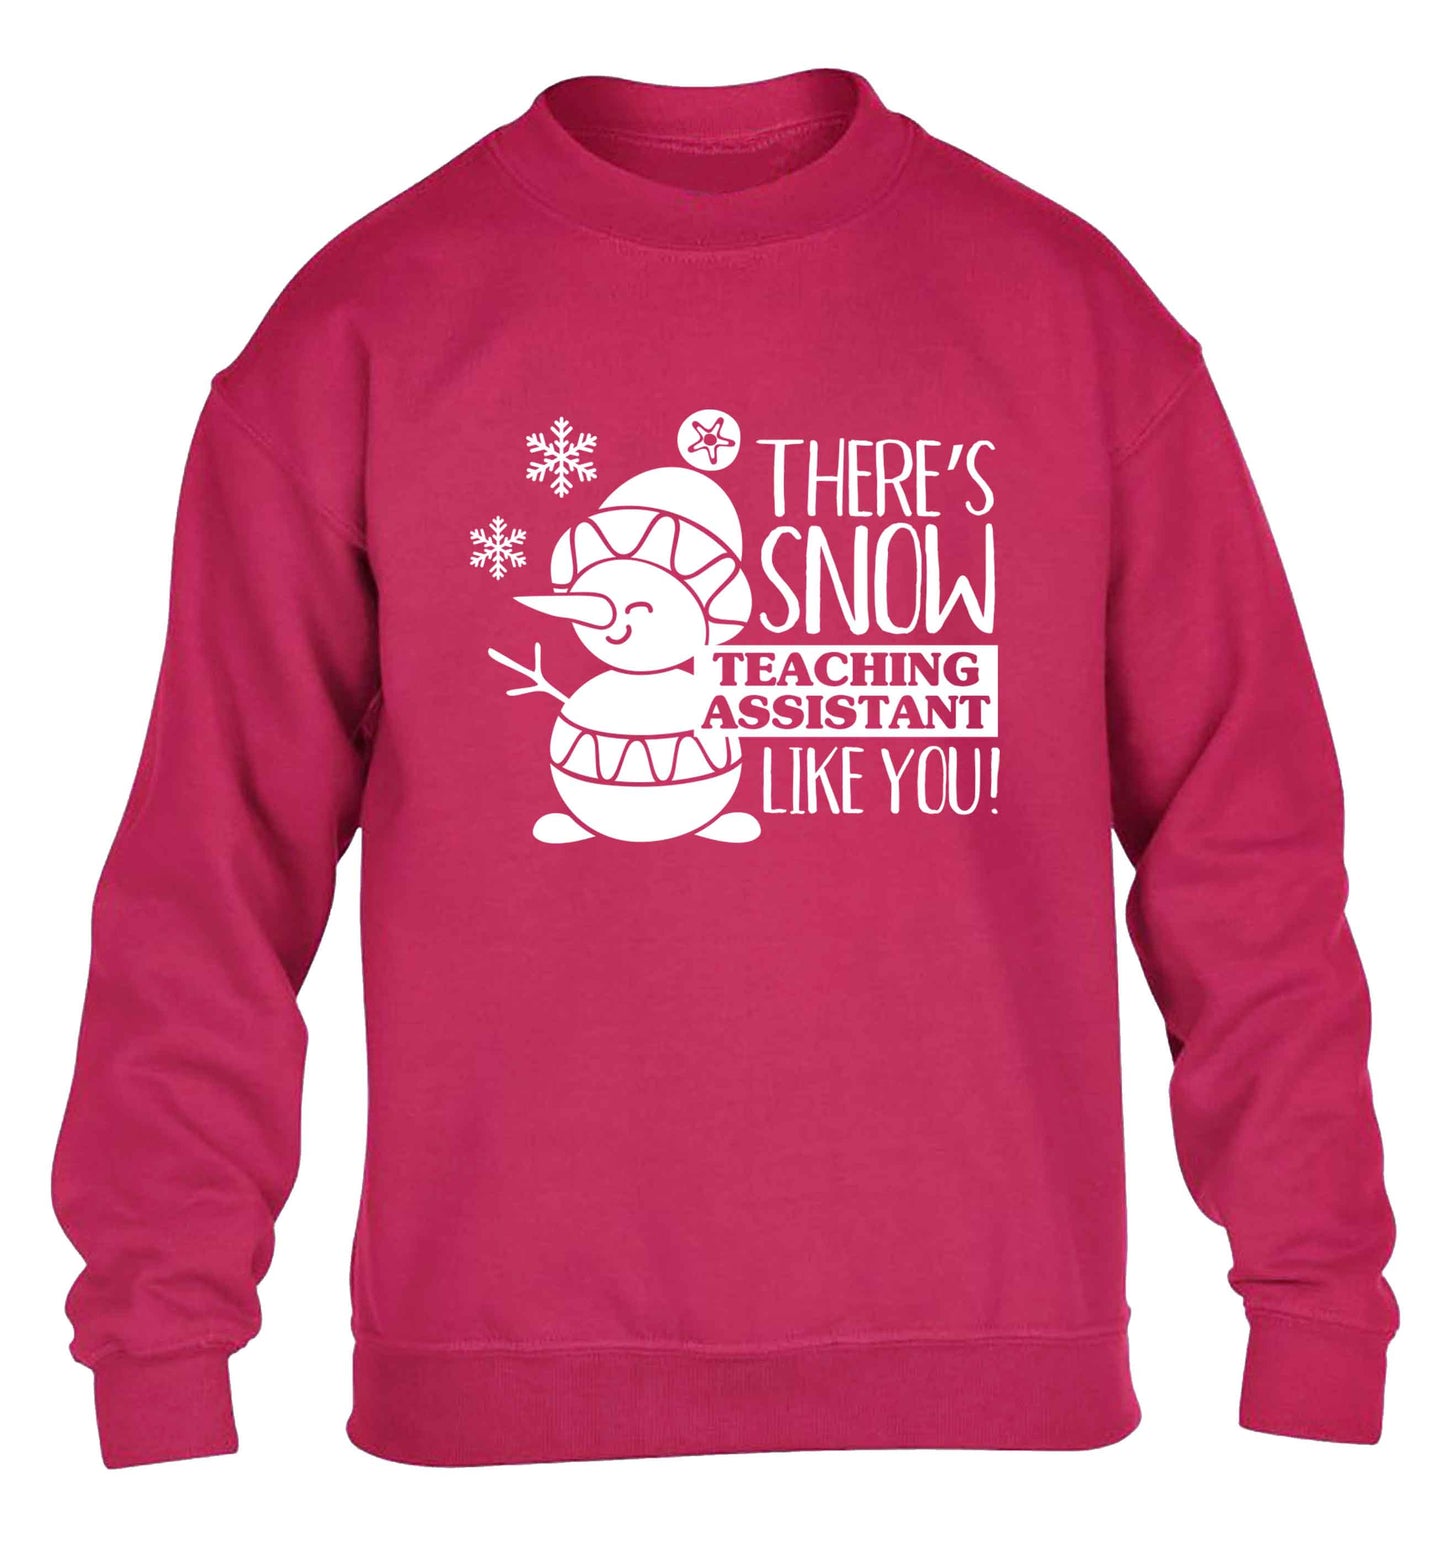 There's snow teaching assistant like you children's pink sweater 12-13 Years